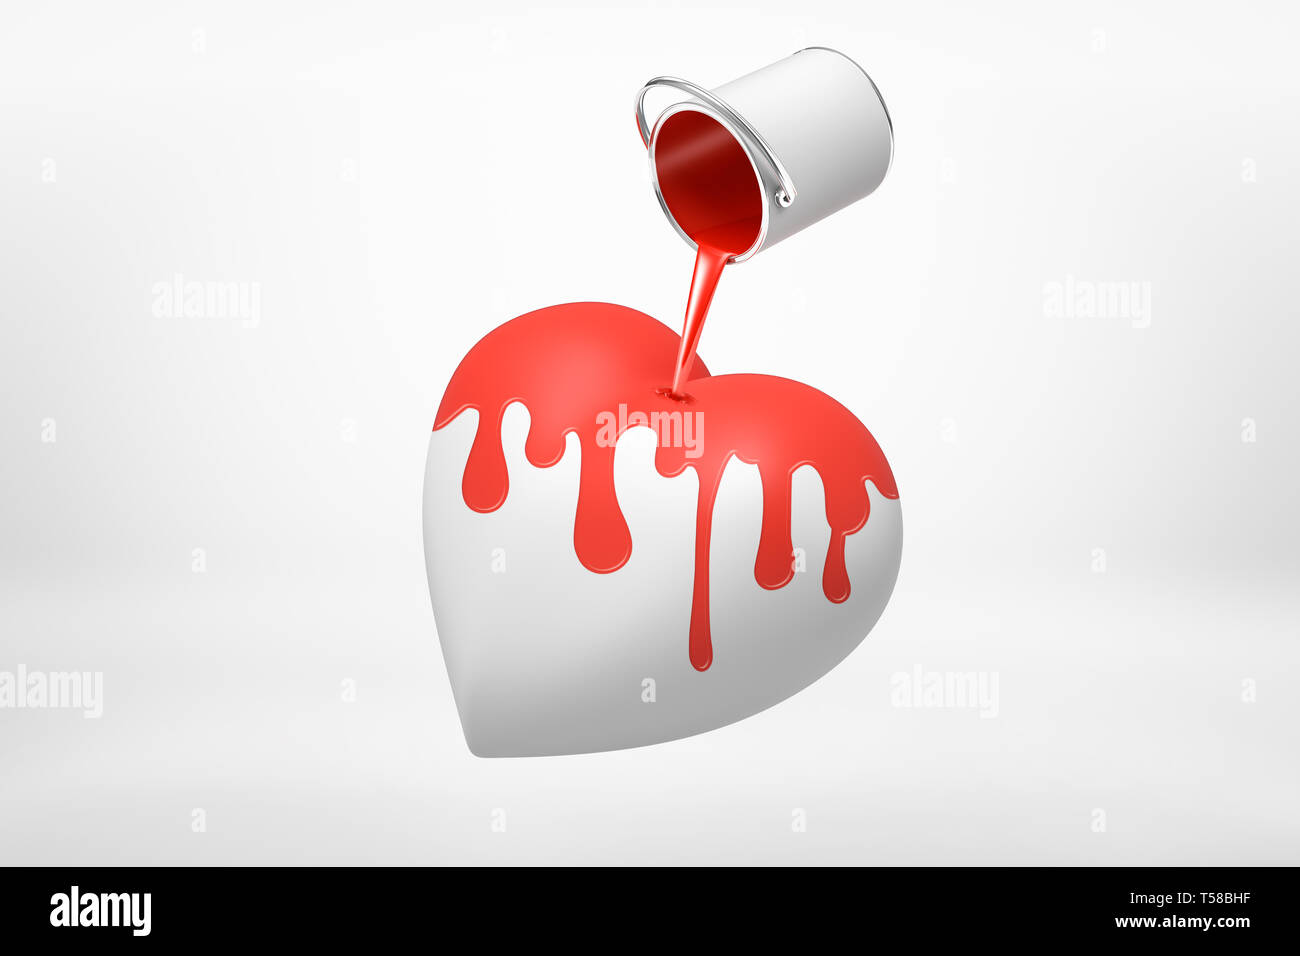 3d rendering of small silver paint bucket turned upside down with red paint pouring on big white heart isolated on white background Stock Photo